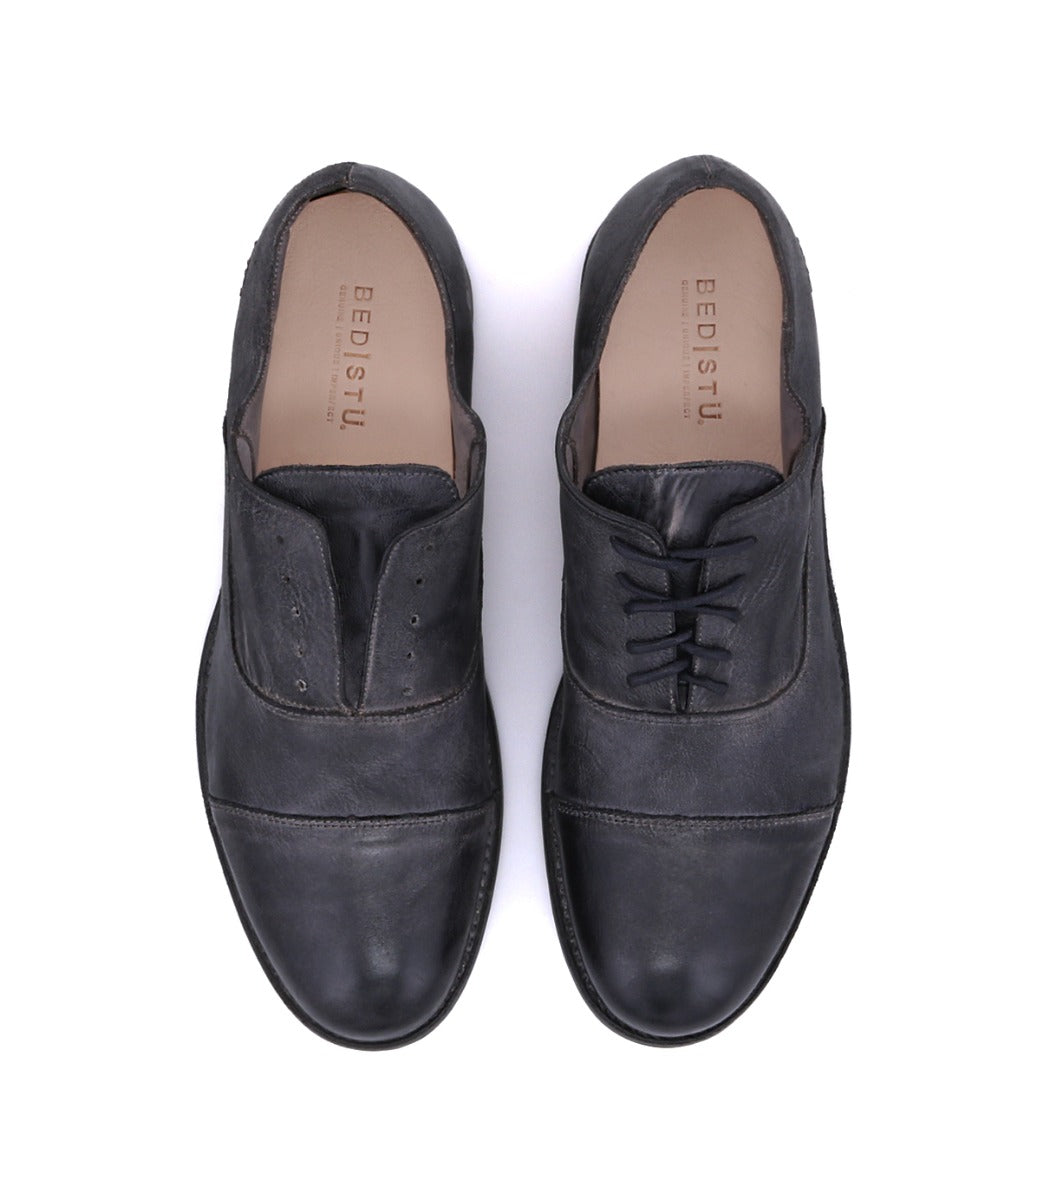 A pair of Bed Stu Thorn men's black leather shoes.